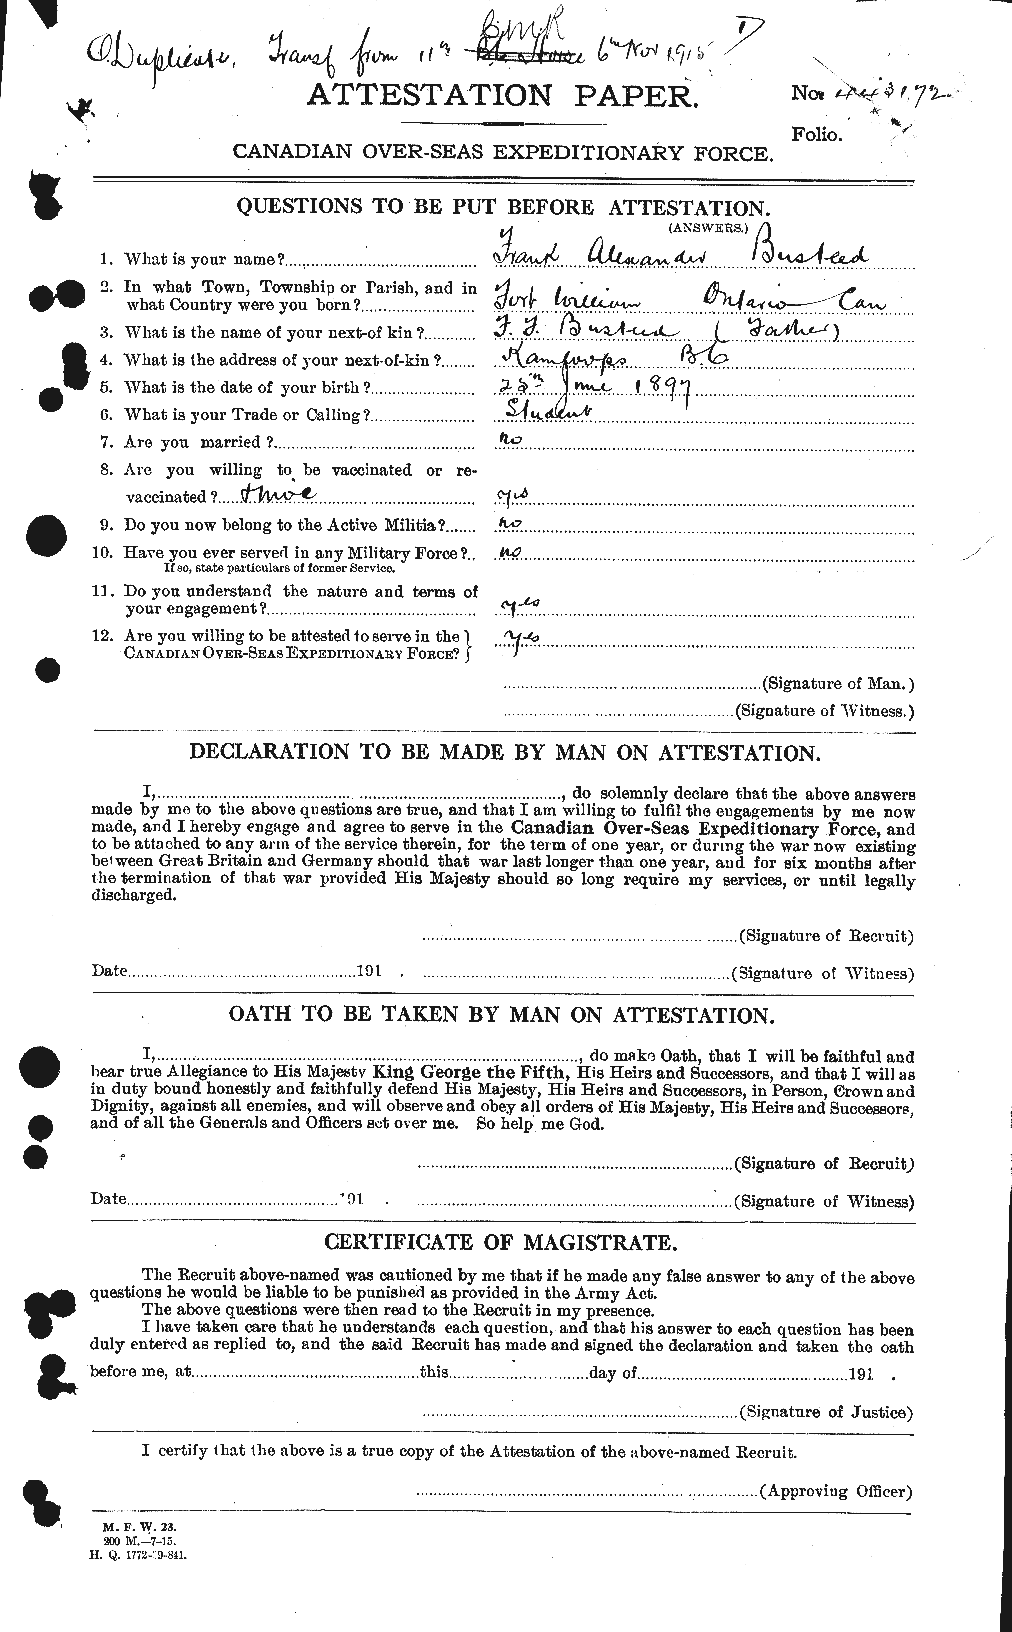 Personnel Records of the First World War - CEF 274656a